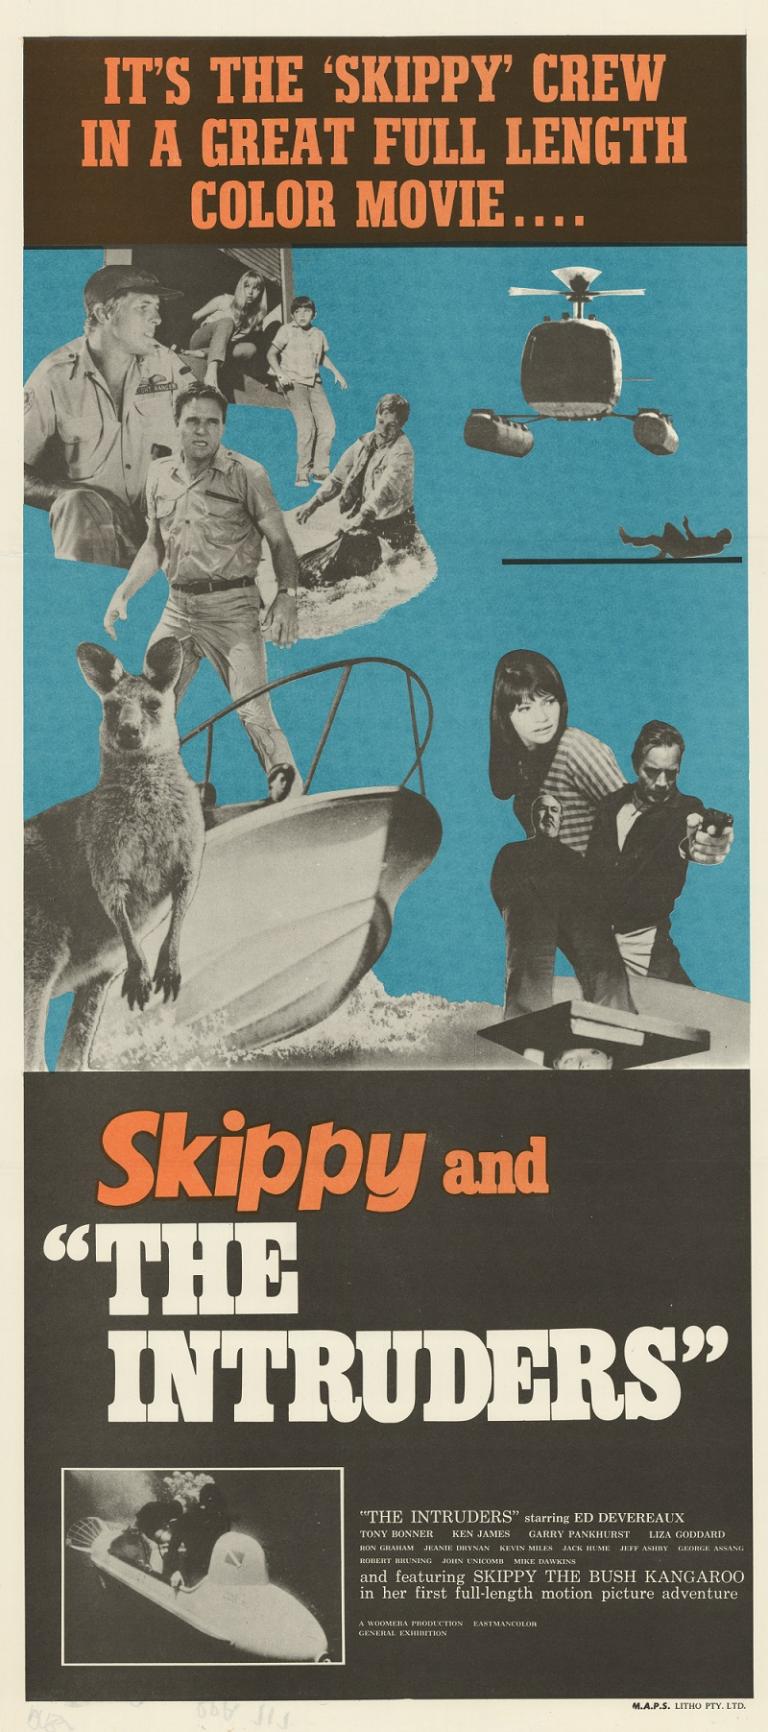 Black and turquoise background, orange writing. Header: "It's the 'Skippy' crew in a great full length color movie..." Several images, including people, a helicopter, a motorboat and Skippy.